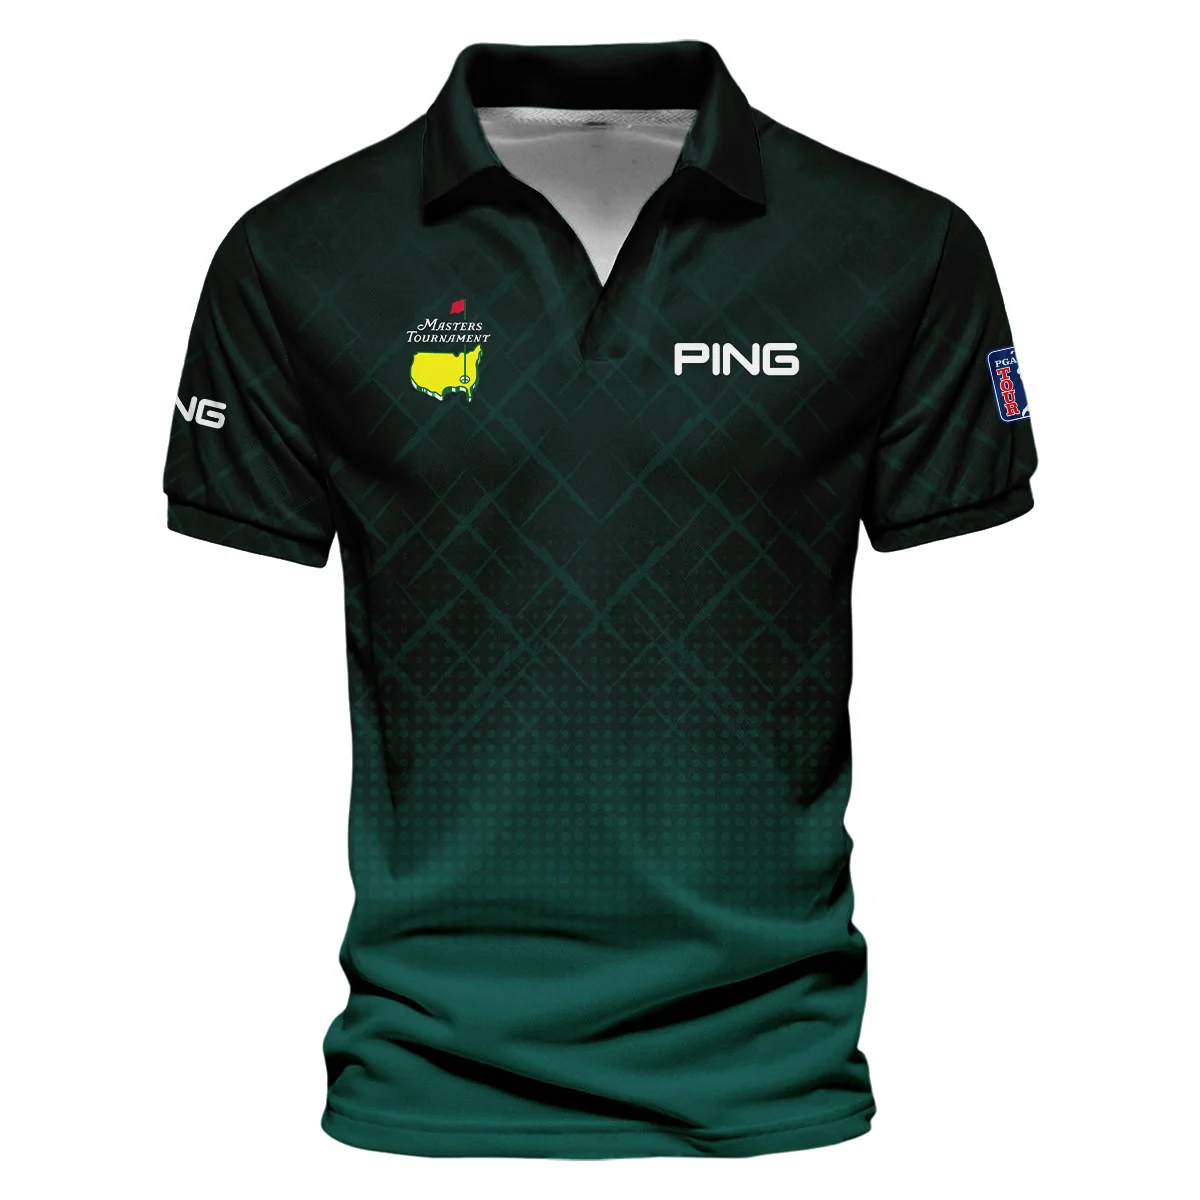 Ping Masters Tournament Sport Jersey Pattern Dark Green Vneck Long Polo Shirt Style Classic Long Polo Shirt For Men